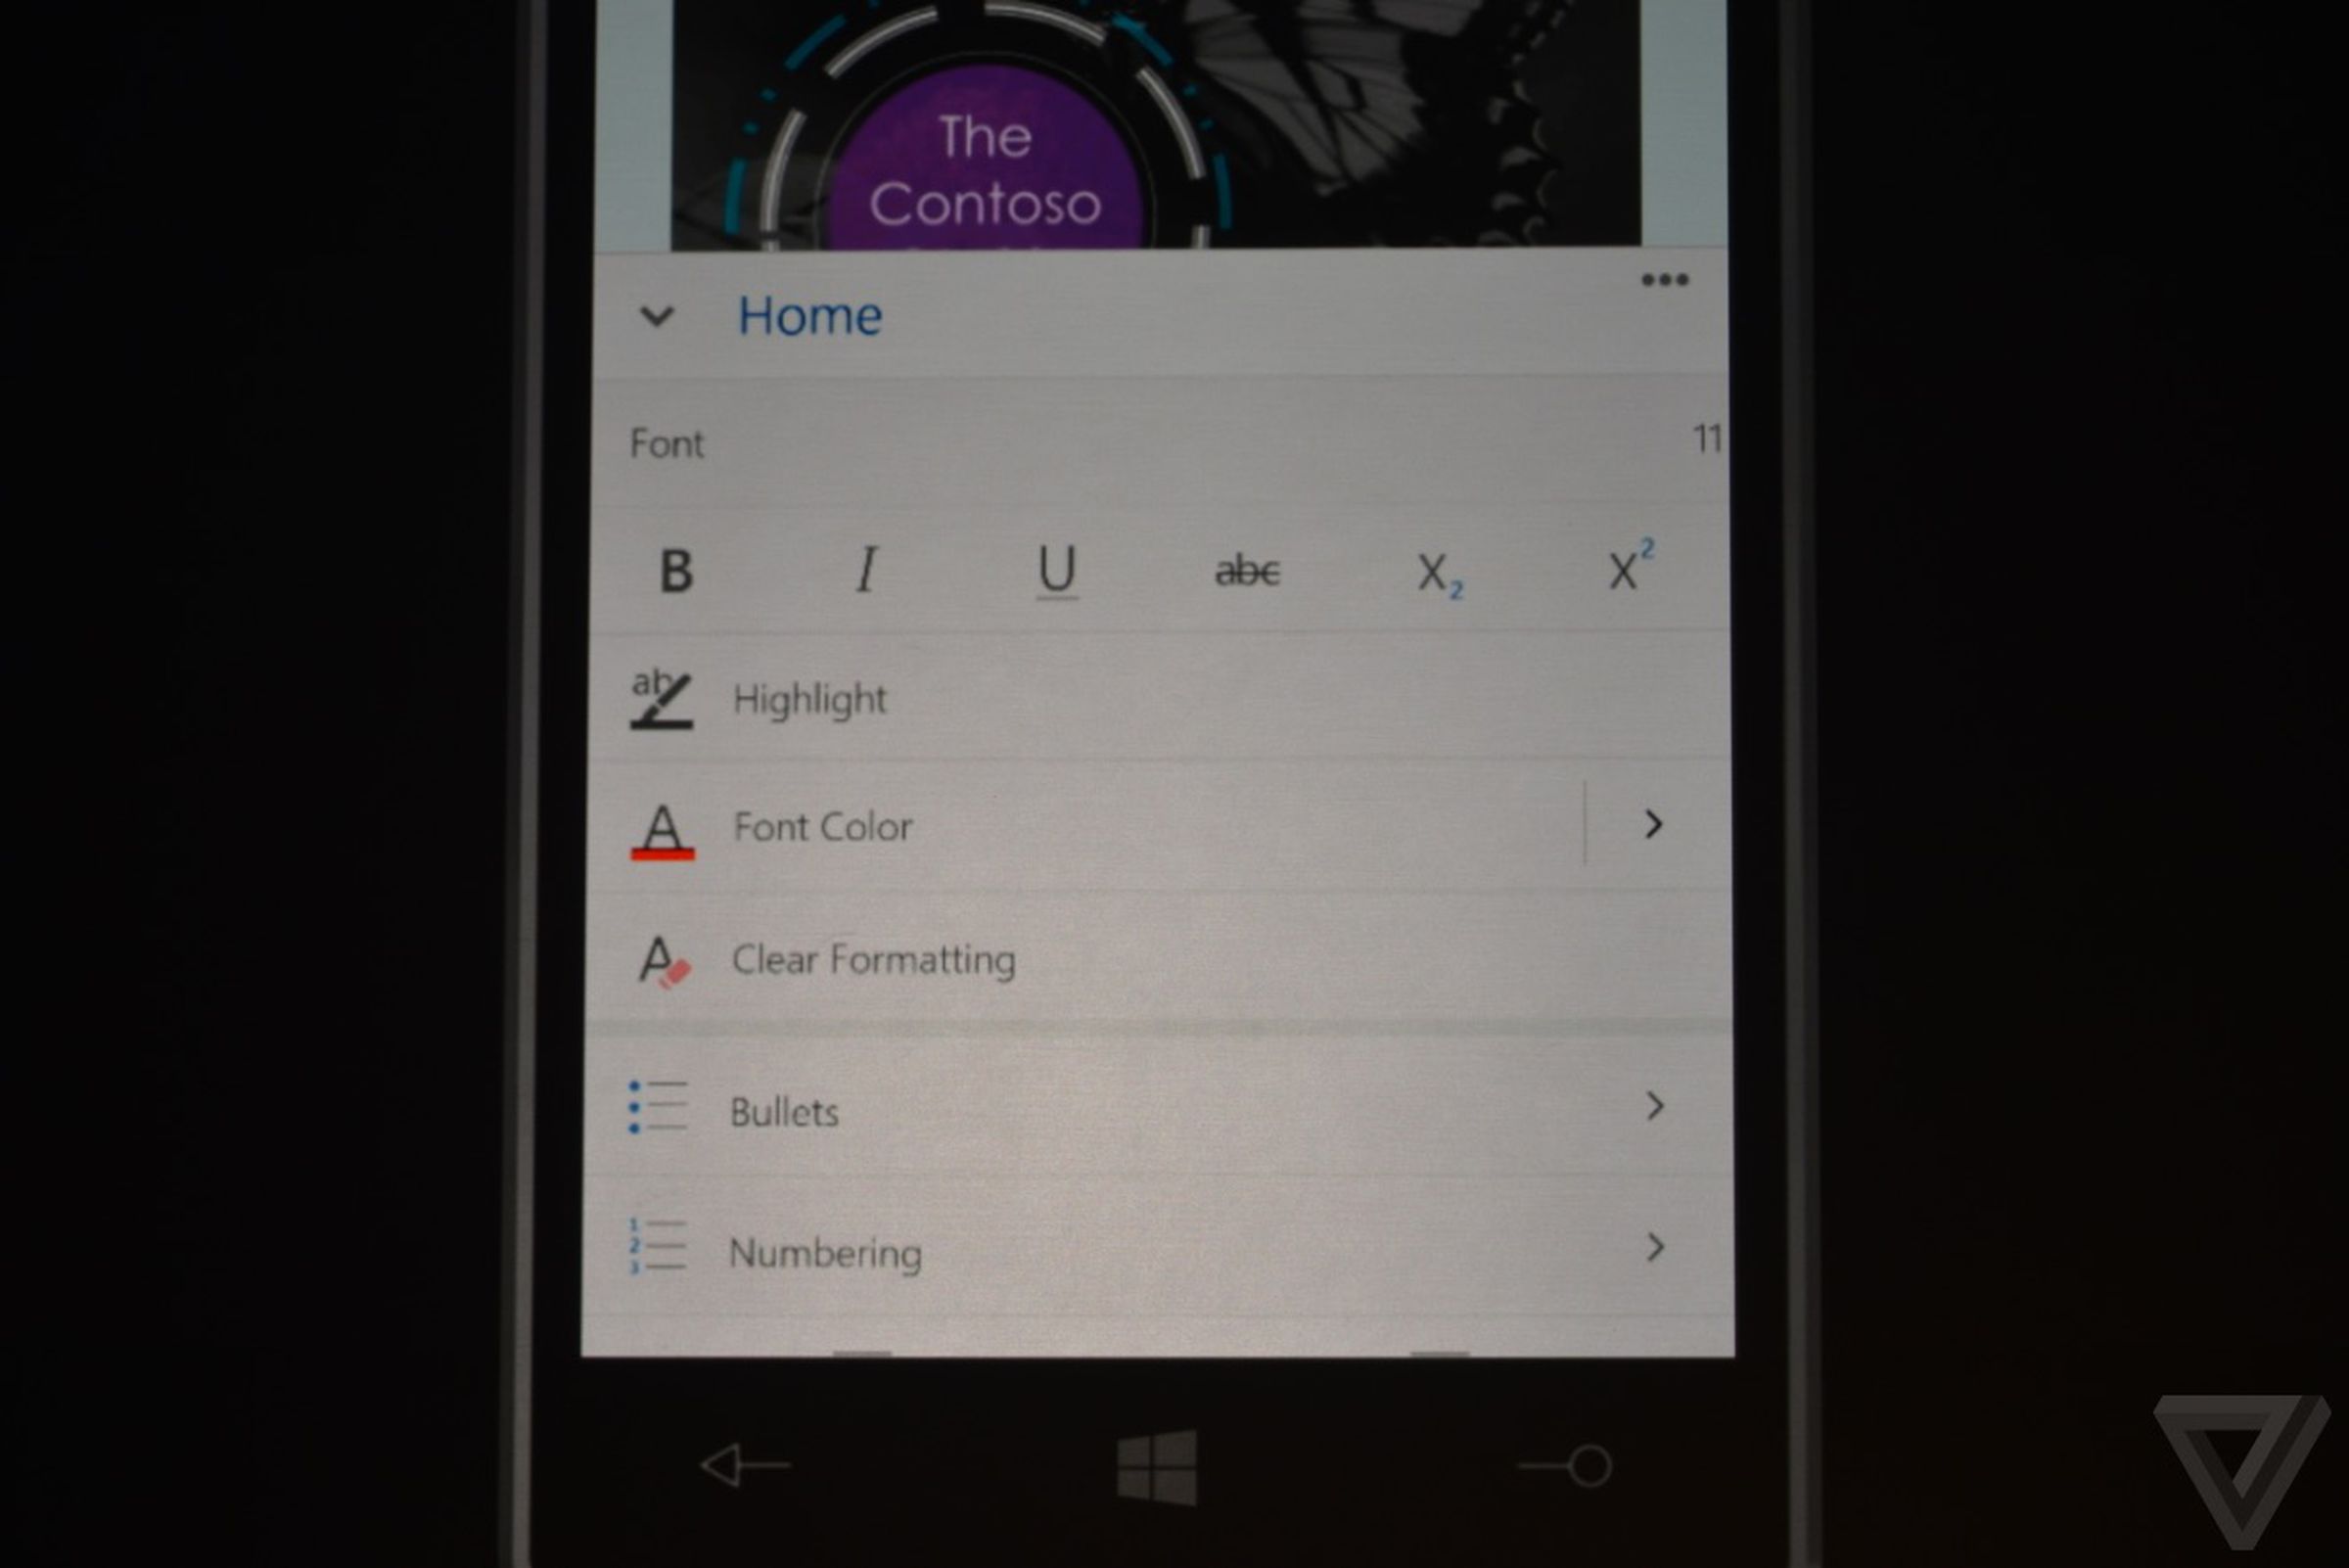 Office for Windows 10 phones and tablets in photos